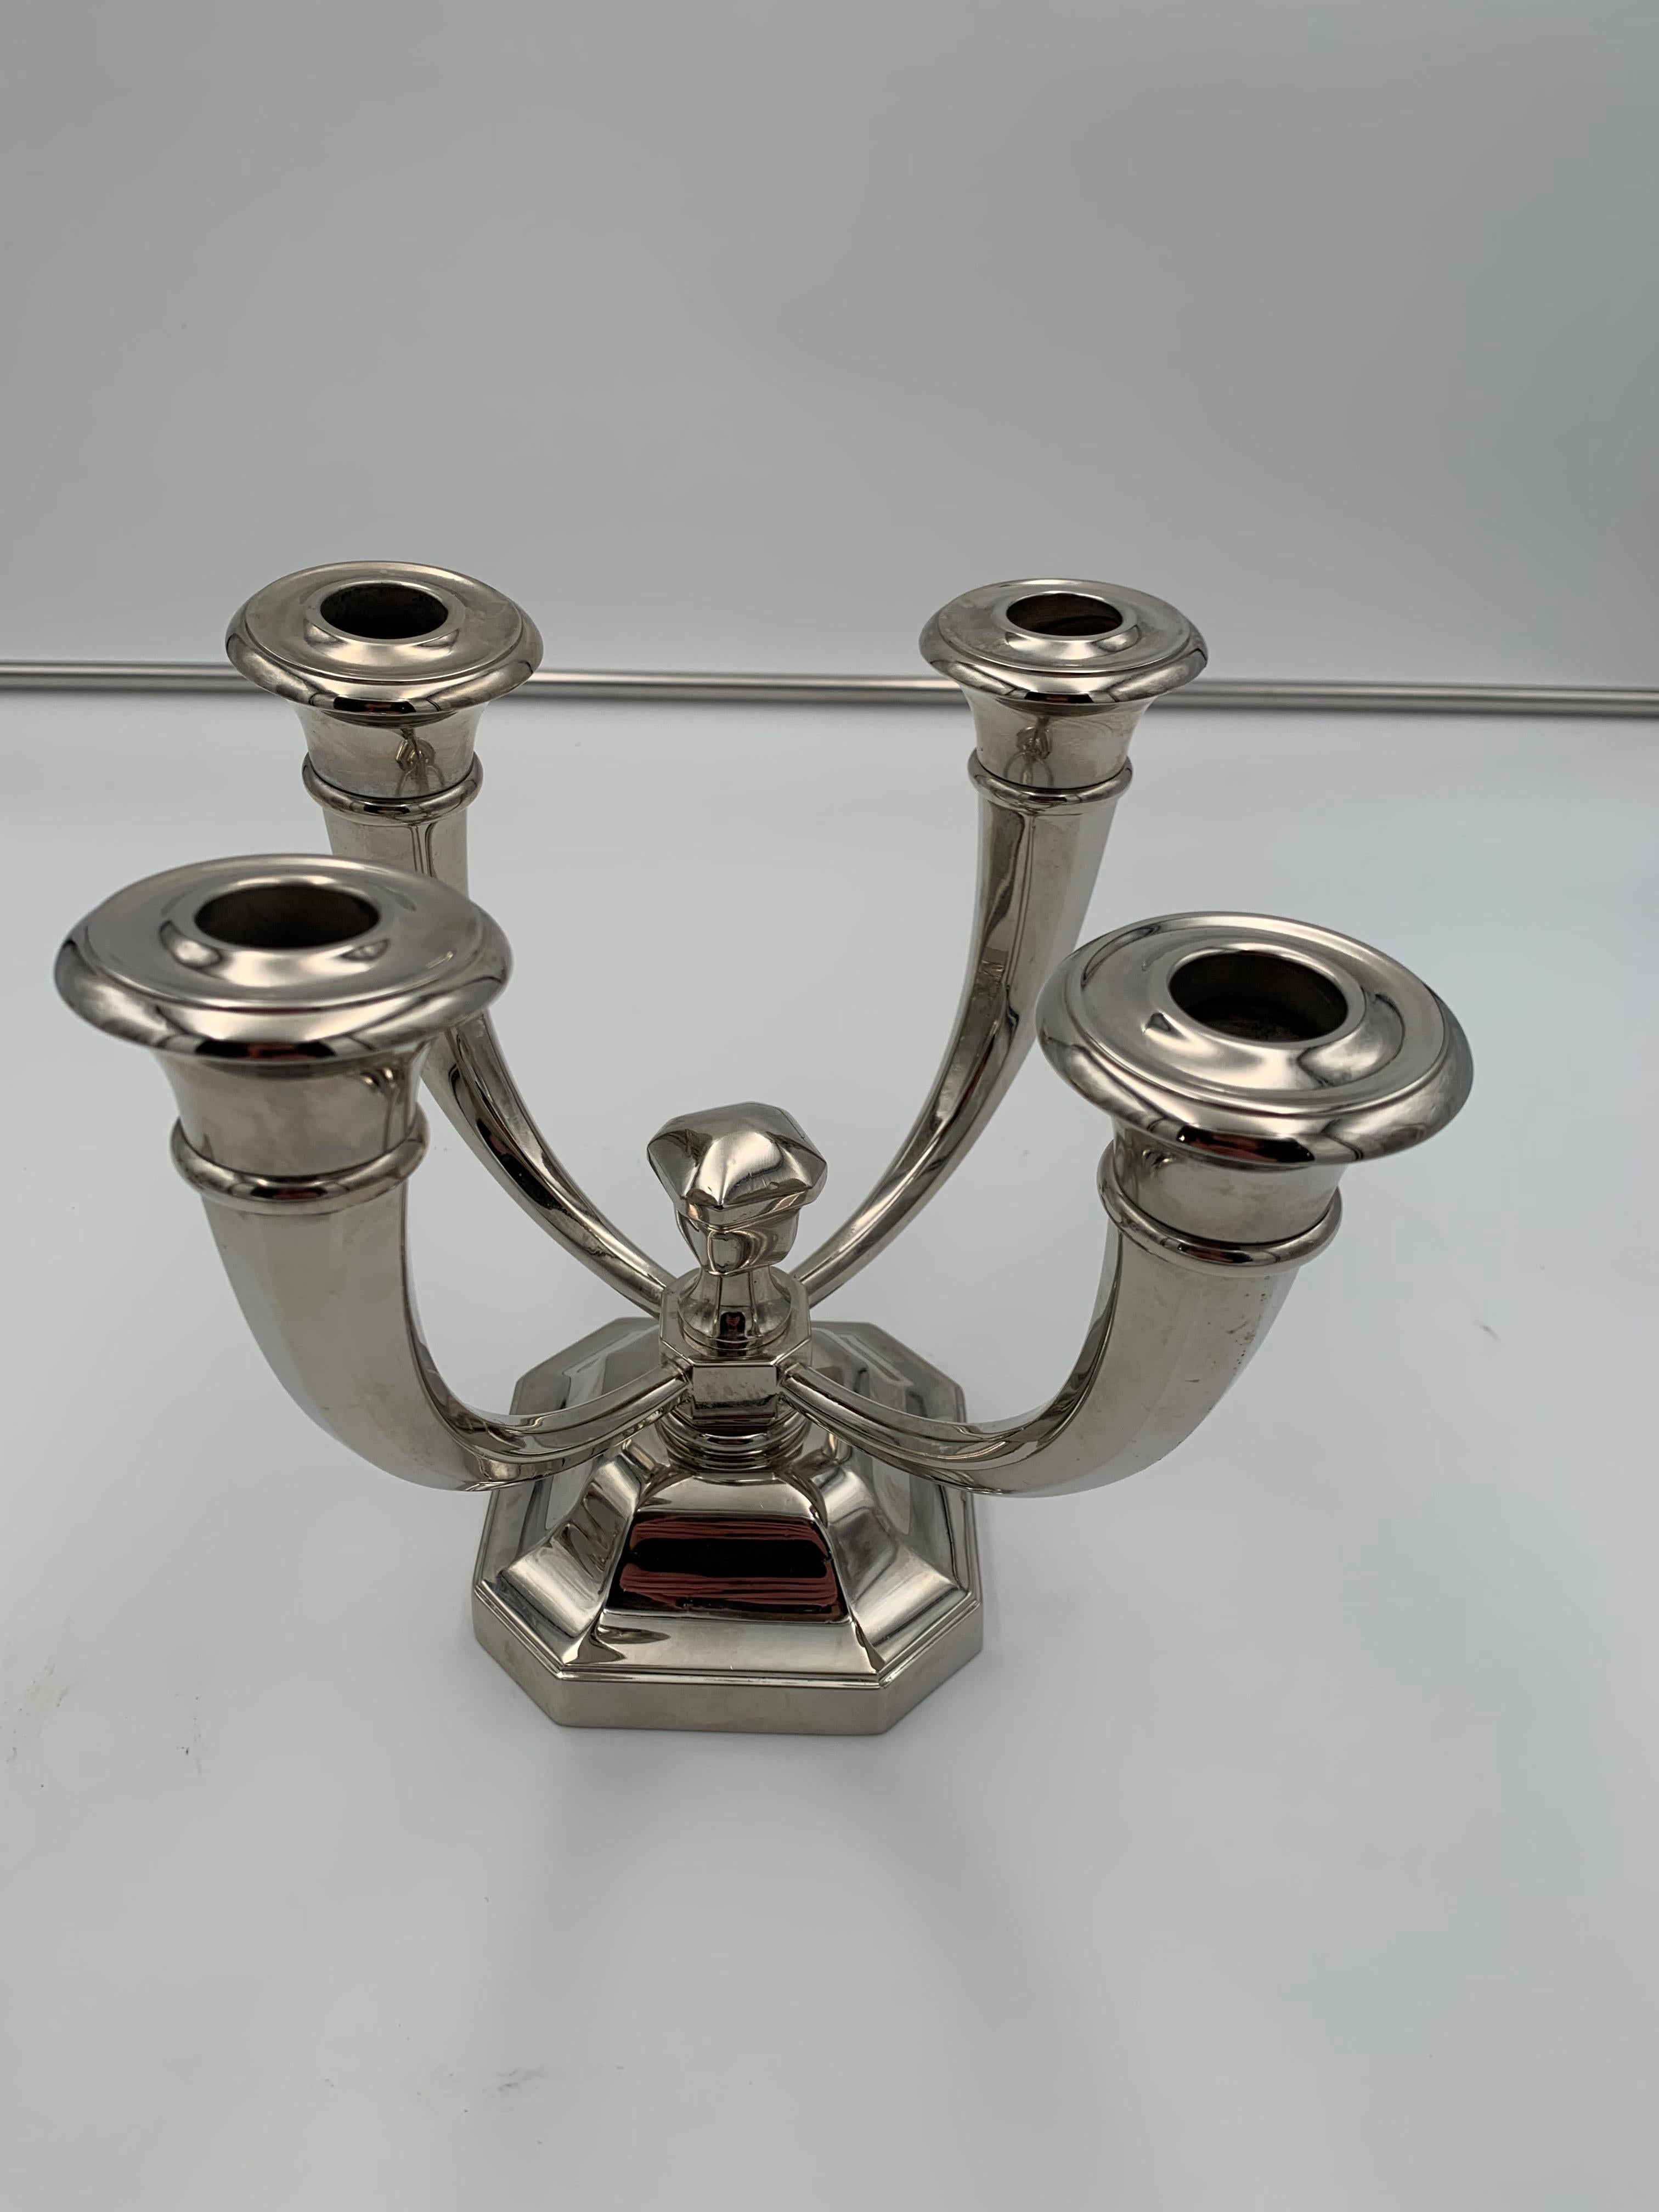 Mid-20th Century Pair of Art Deco Candlesticks by J. Leleu, Nickel-Plate, Bronze, France, c. 1930 For Sale